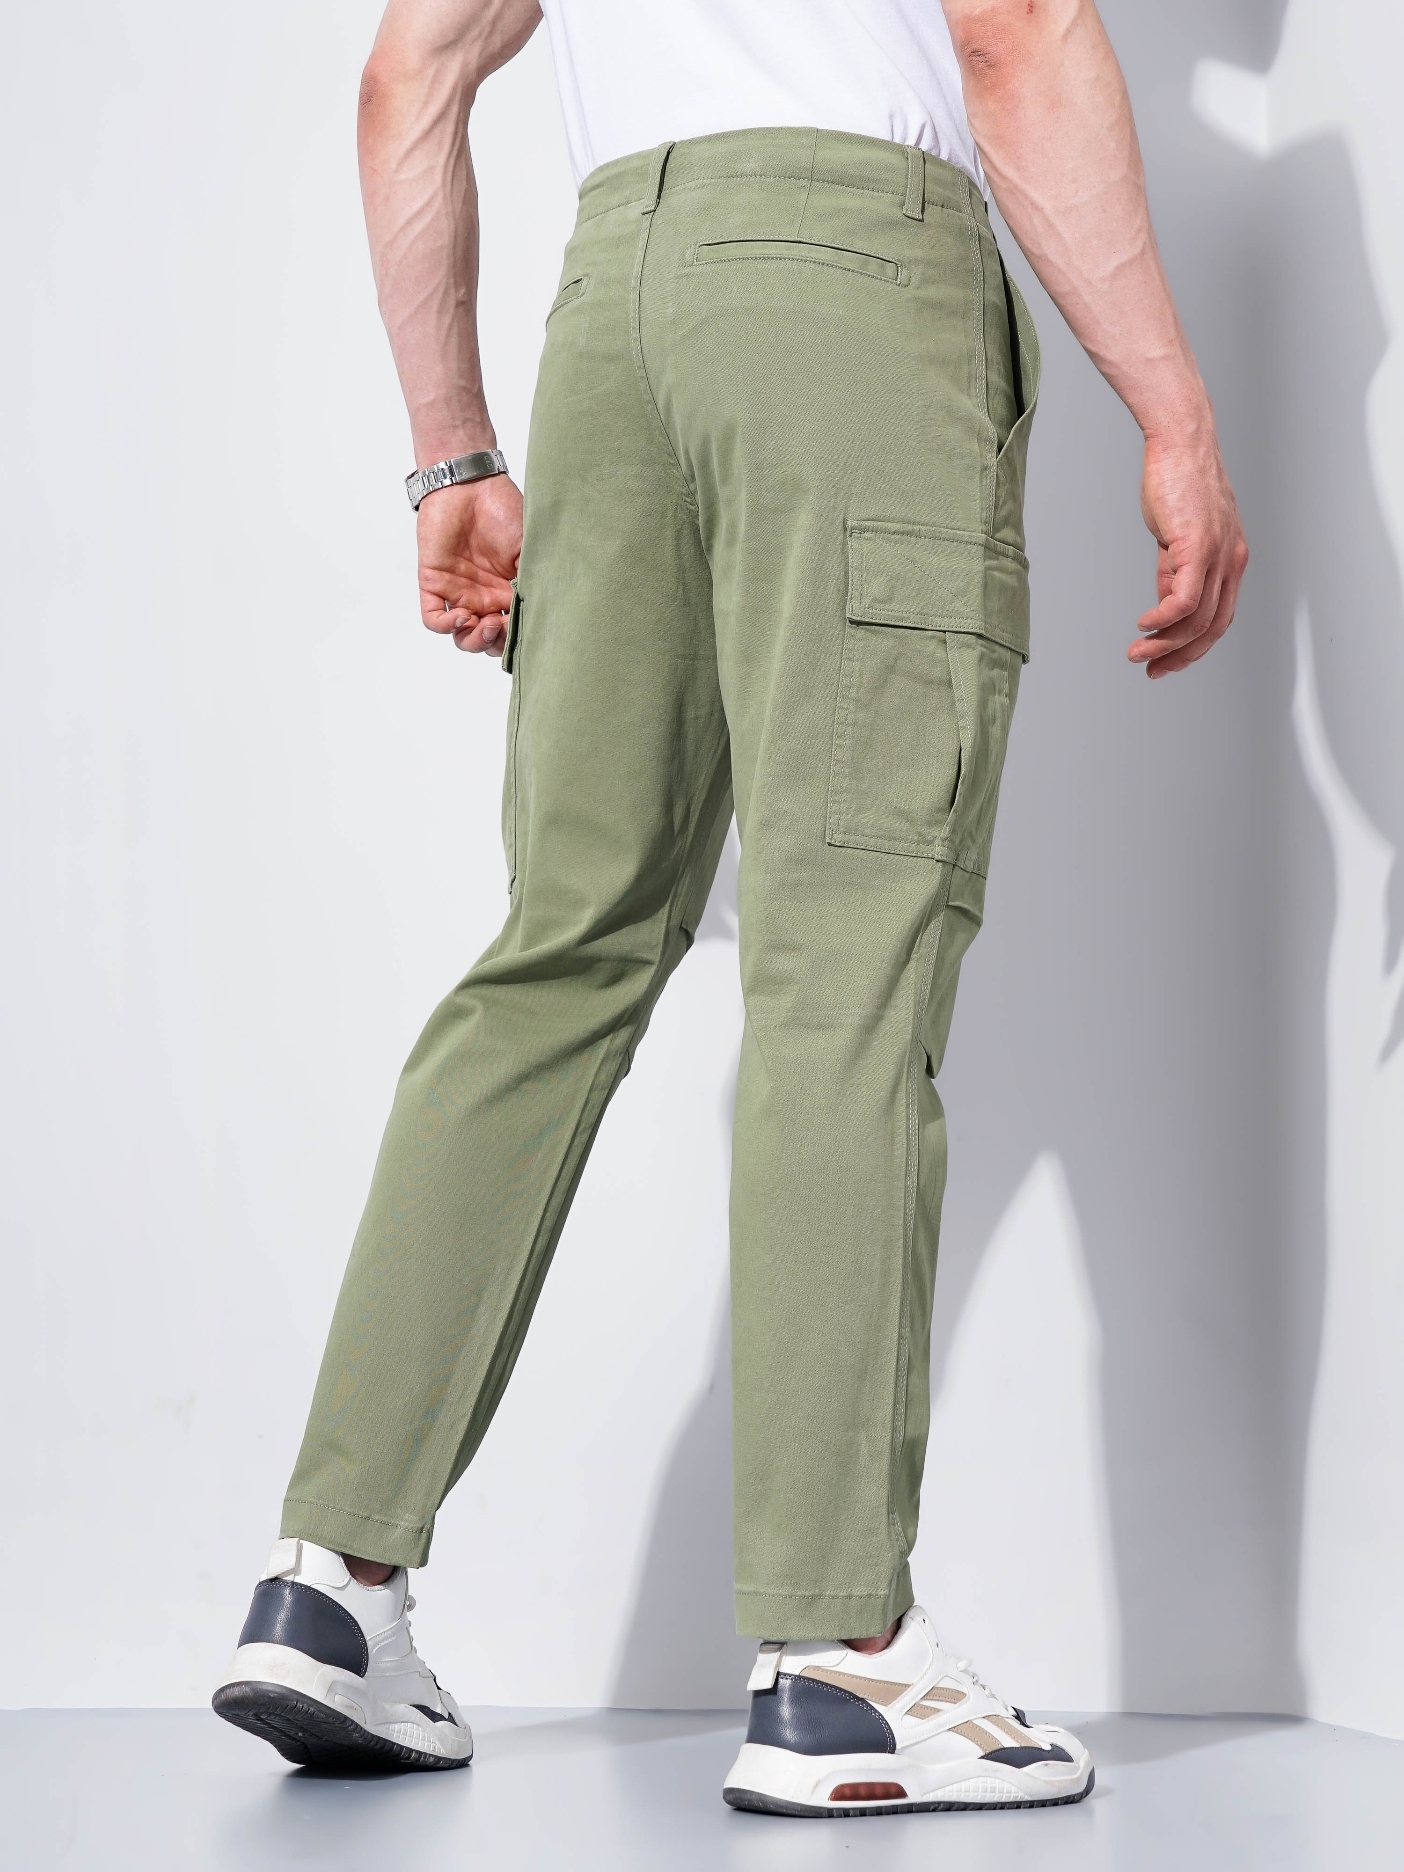 Green Pants Hot Weather Outfits For Men (26 ideas & outfits) | Lookastic